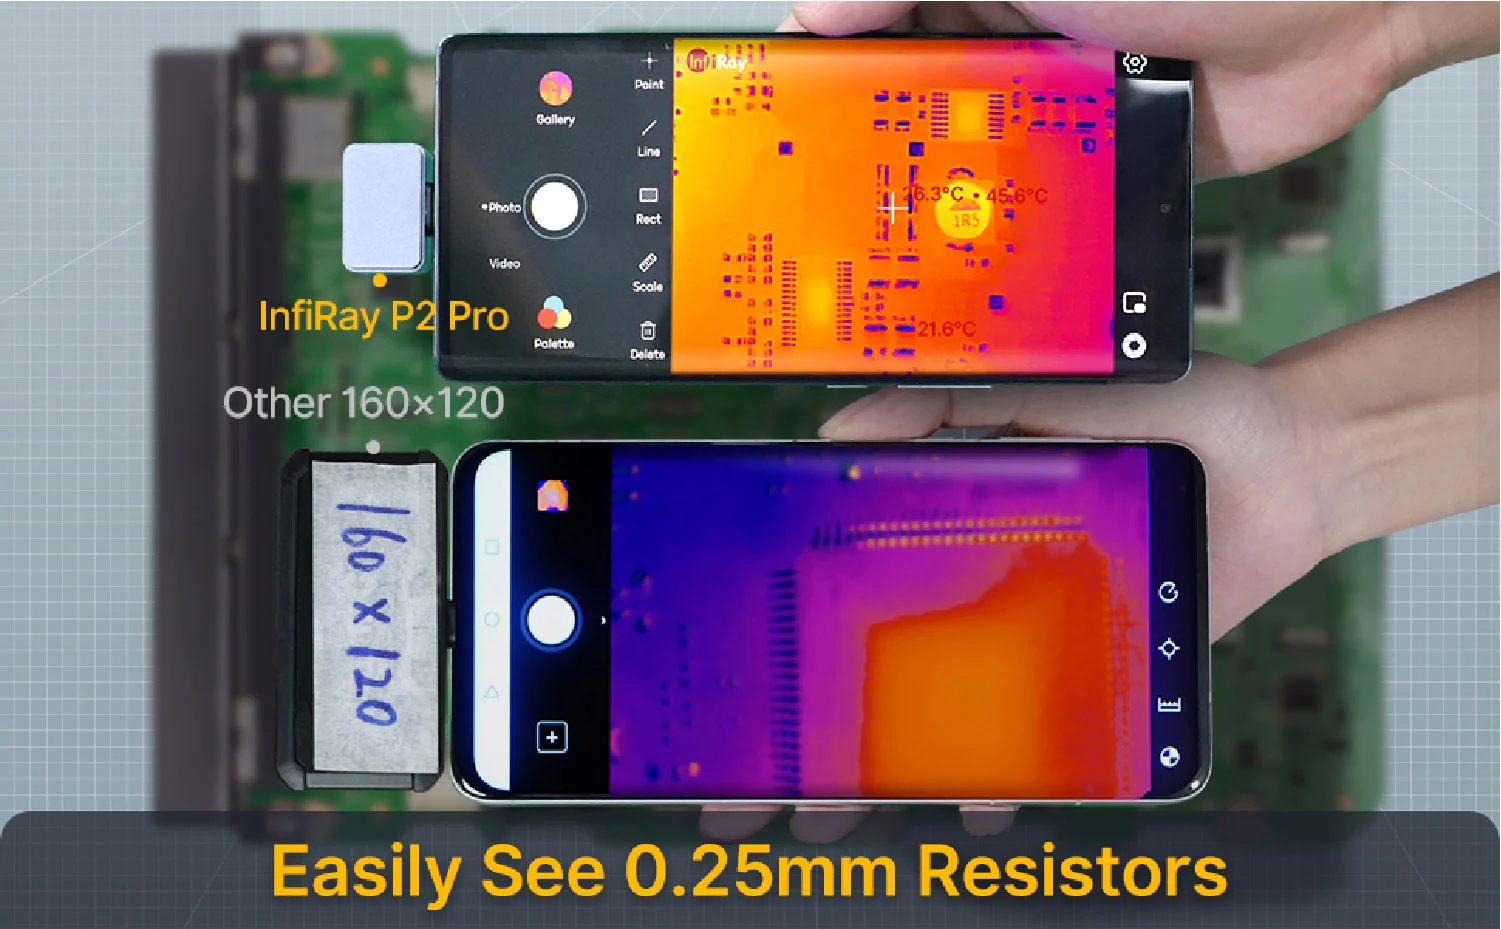 Thermal Camera - Android Type-C, InfiRay P2 Pro & Magnetic Macro